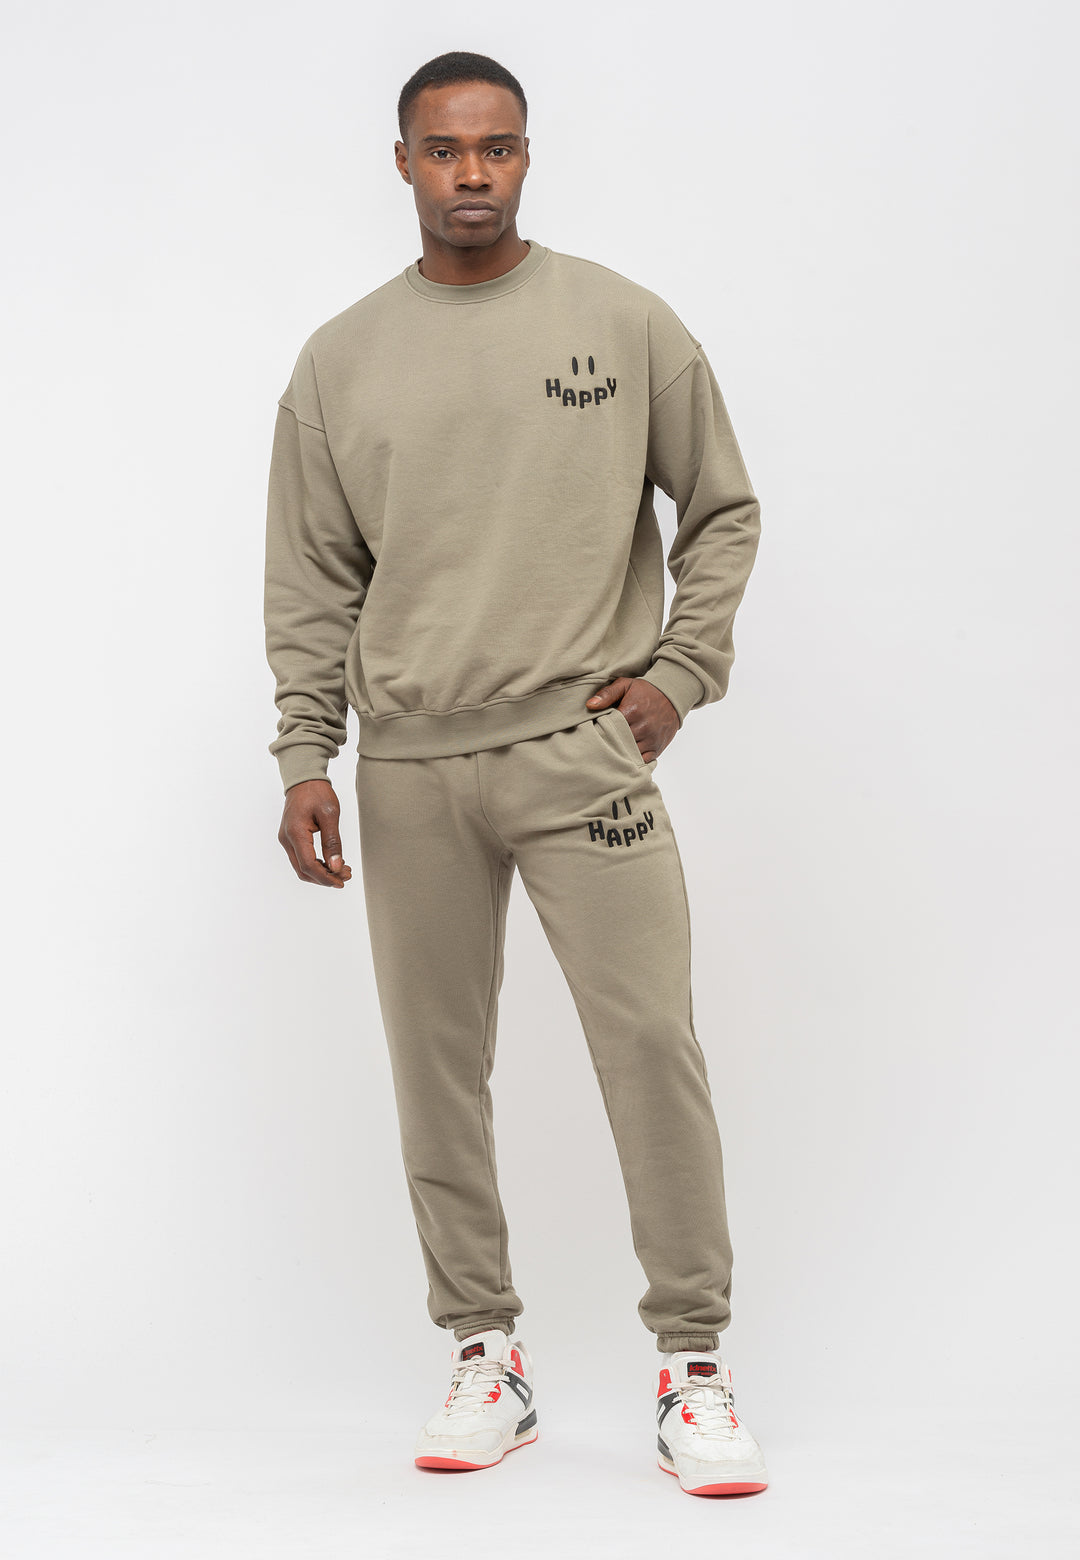 'Happy' Embroidered Tracksuit